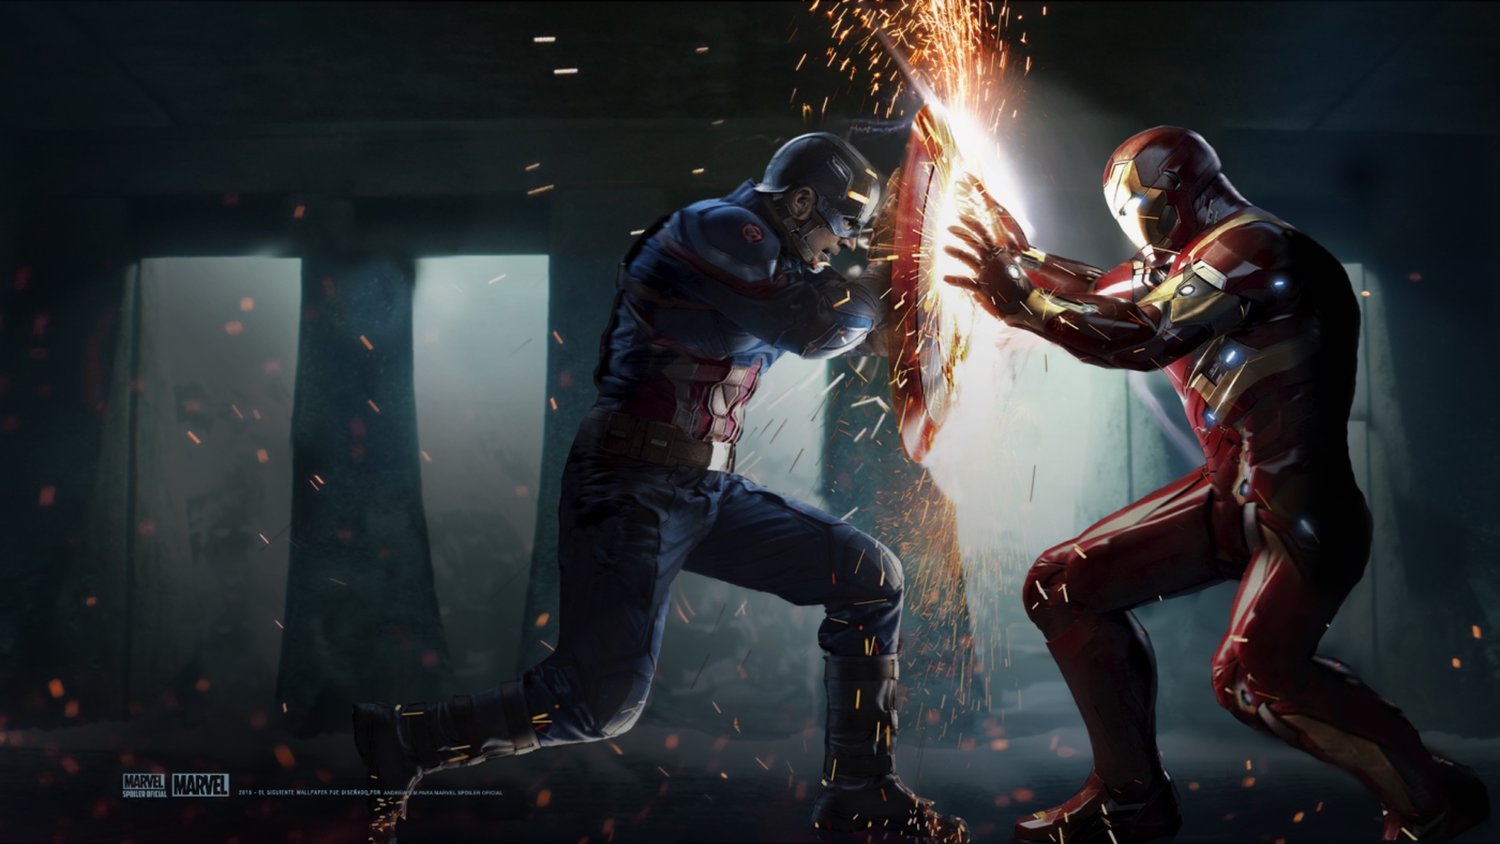 iron man vs captain america fight pop culture reference for what game of thrones has taught us about marketing and branding-